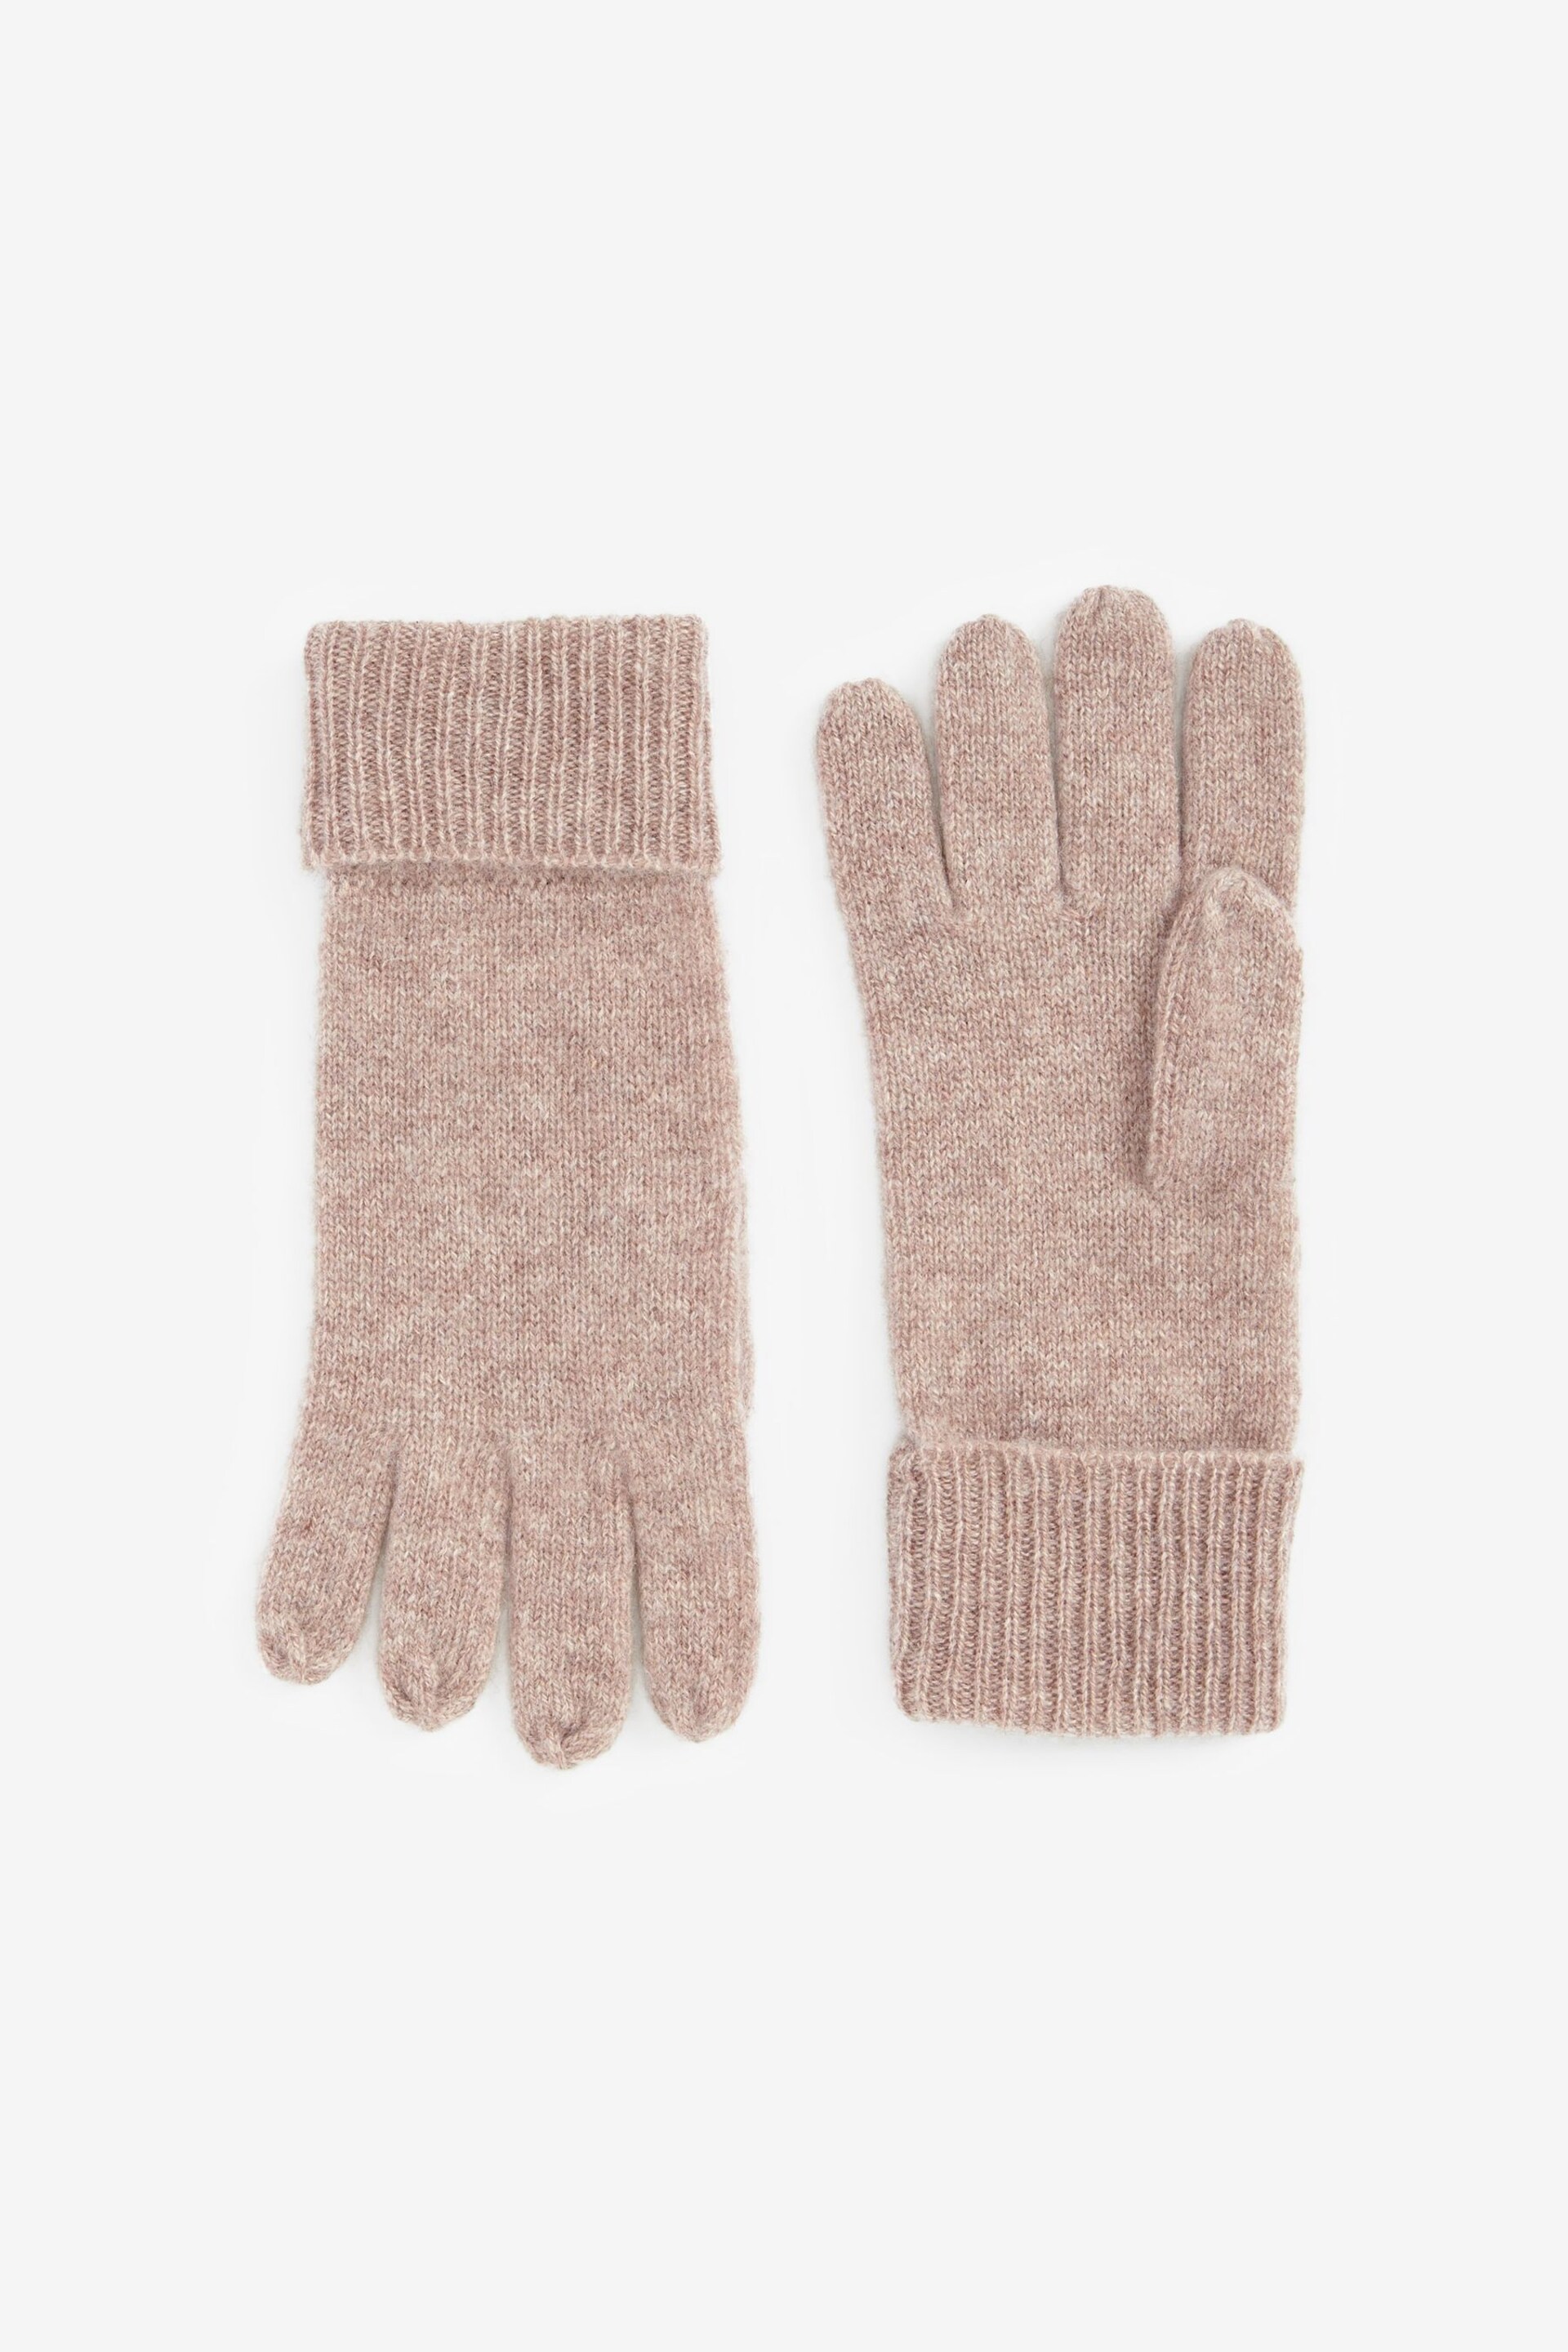 Oatmeal Collection Luxe 100% Cashmere Gloves - Image 3 of 3